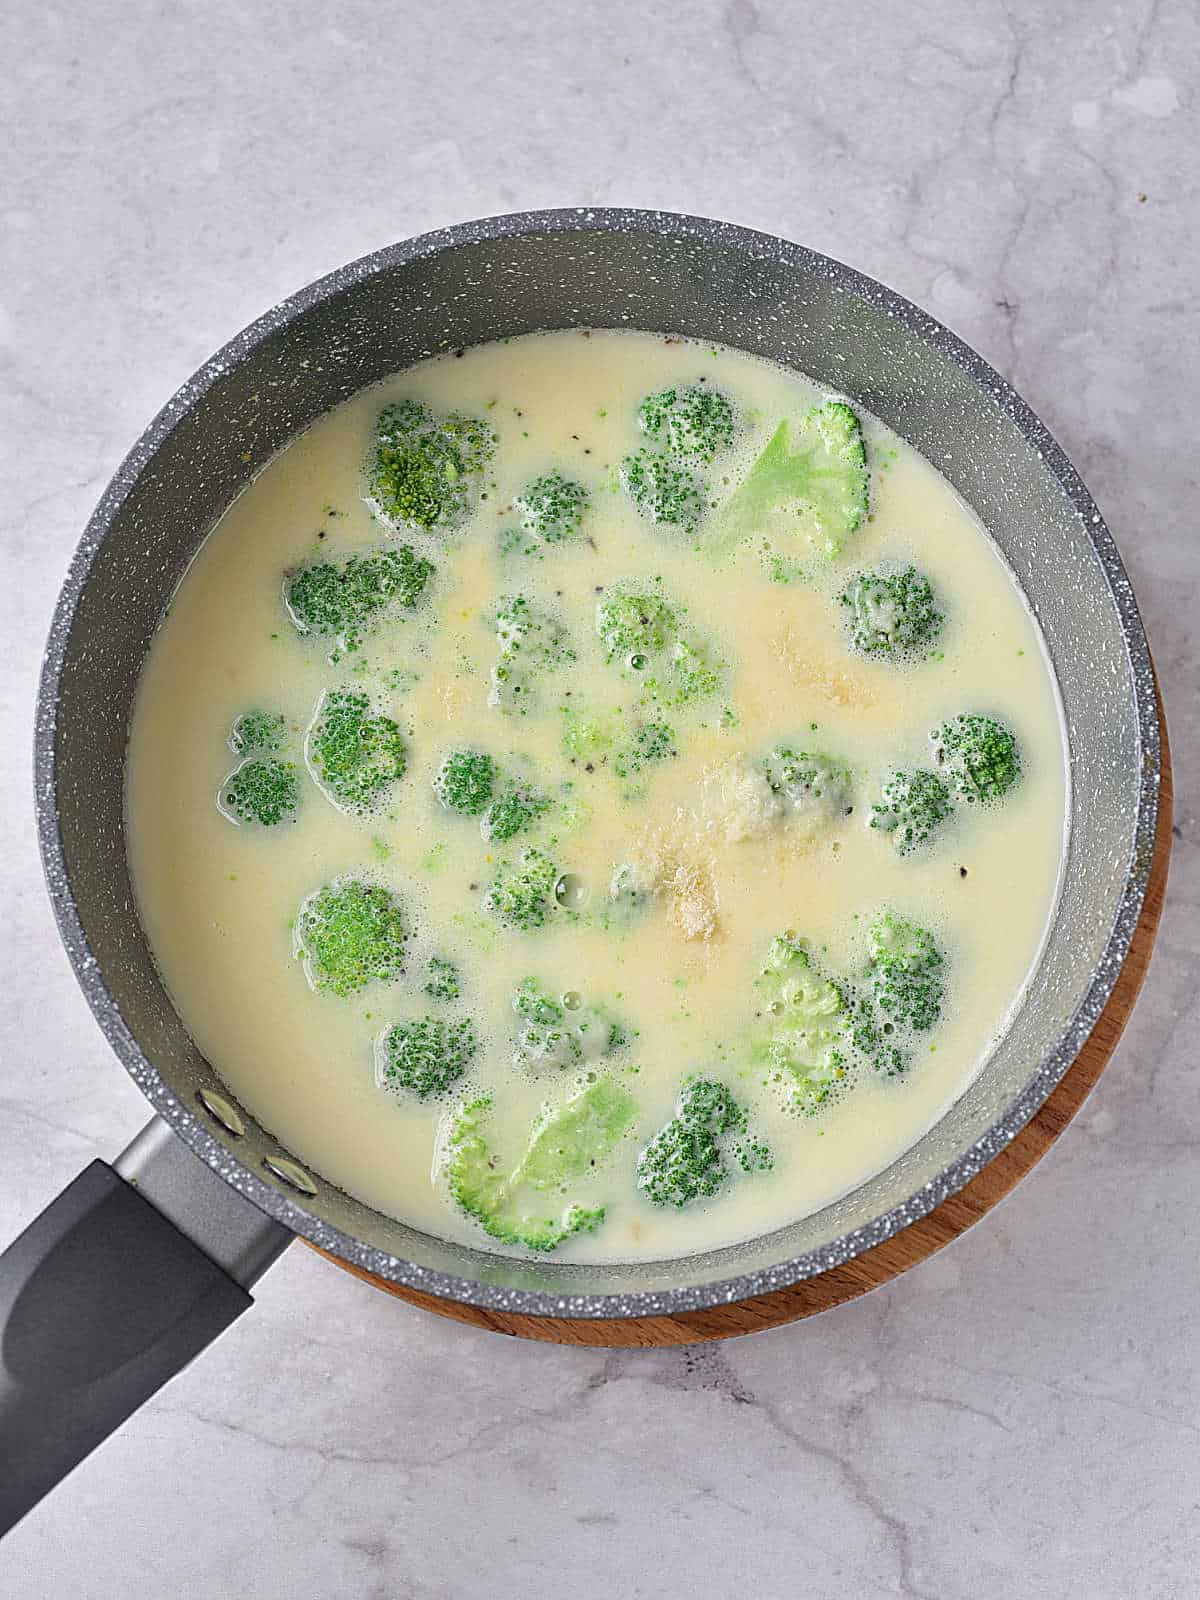 Gray saucepan with soup and broccoli florets on a gray surface.